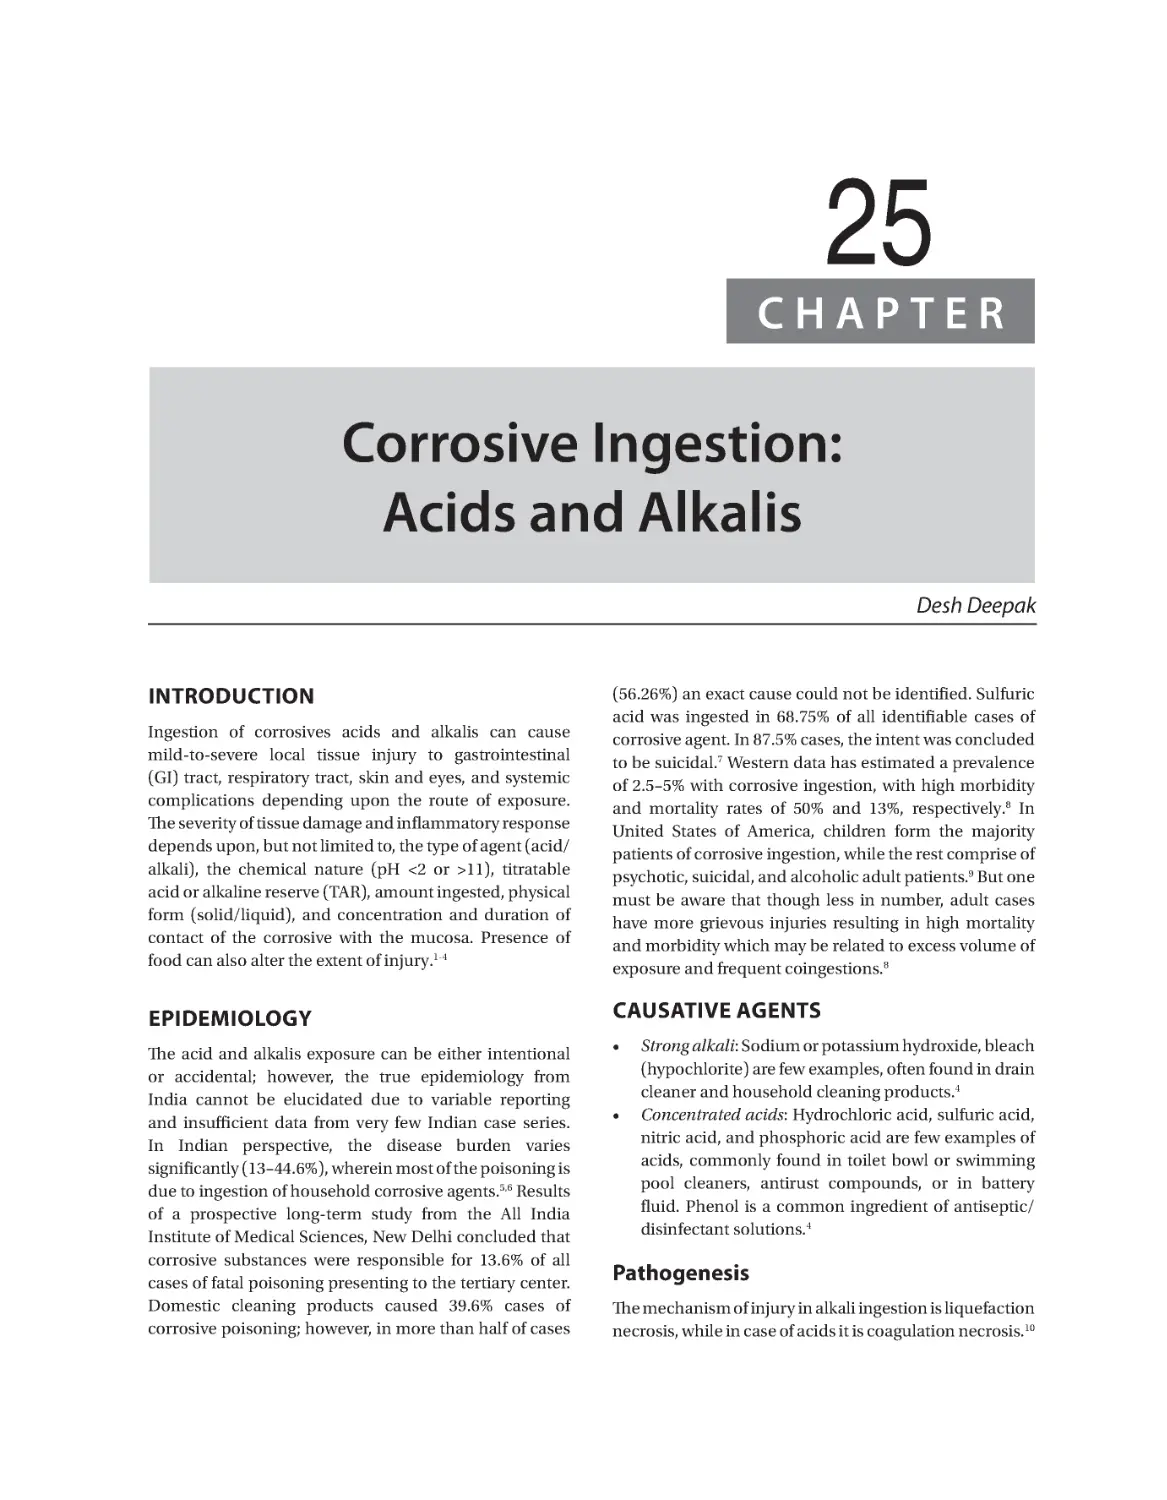 Chapter 25: Corrosive Ingestion: Acids and Alkalis